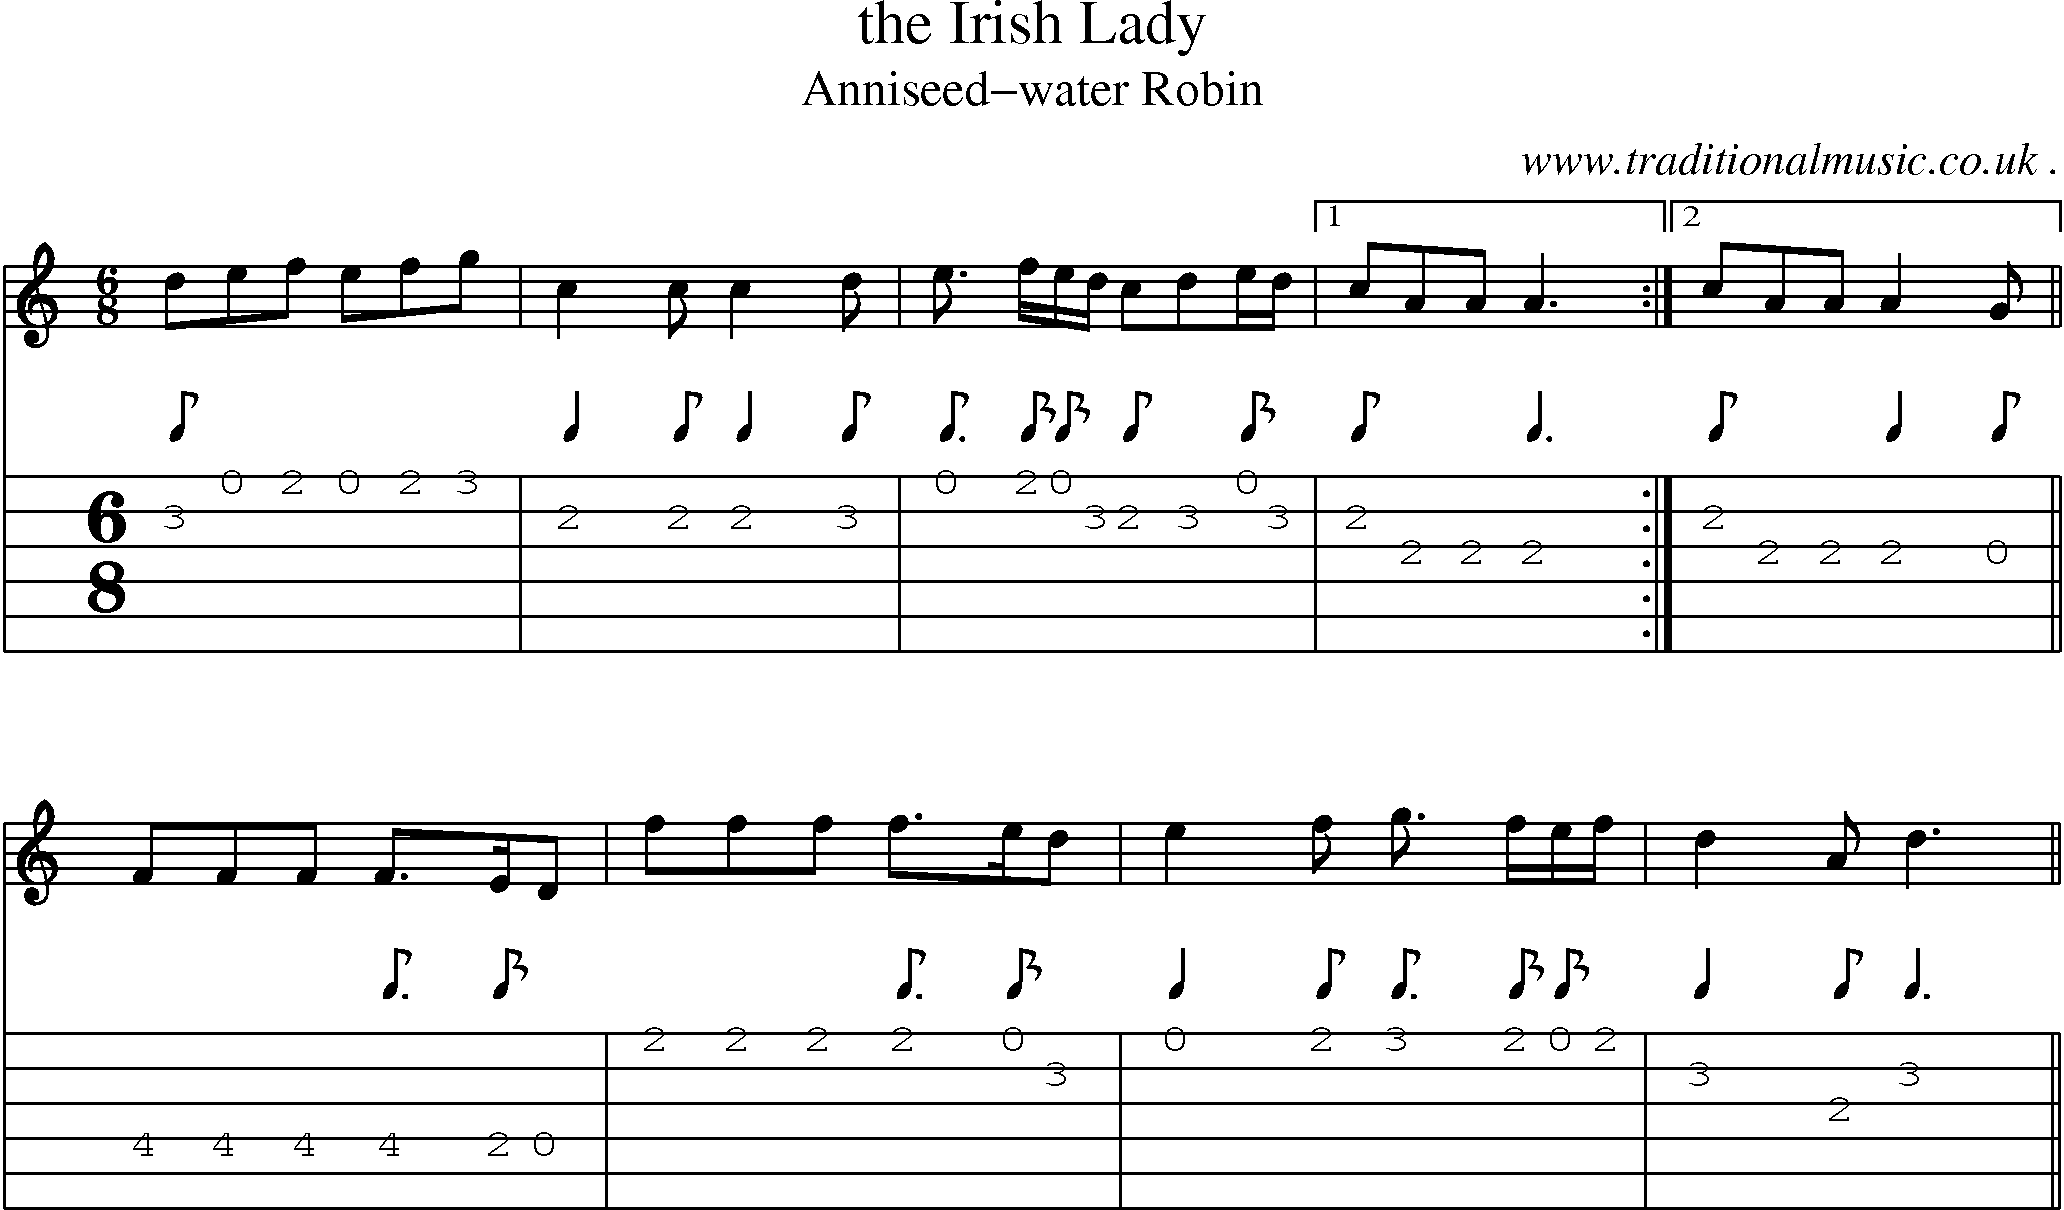 Sheet-music  score, Chords and Guitar Tabs for The Irish Lady